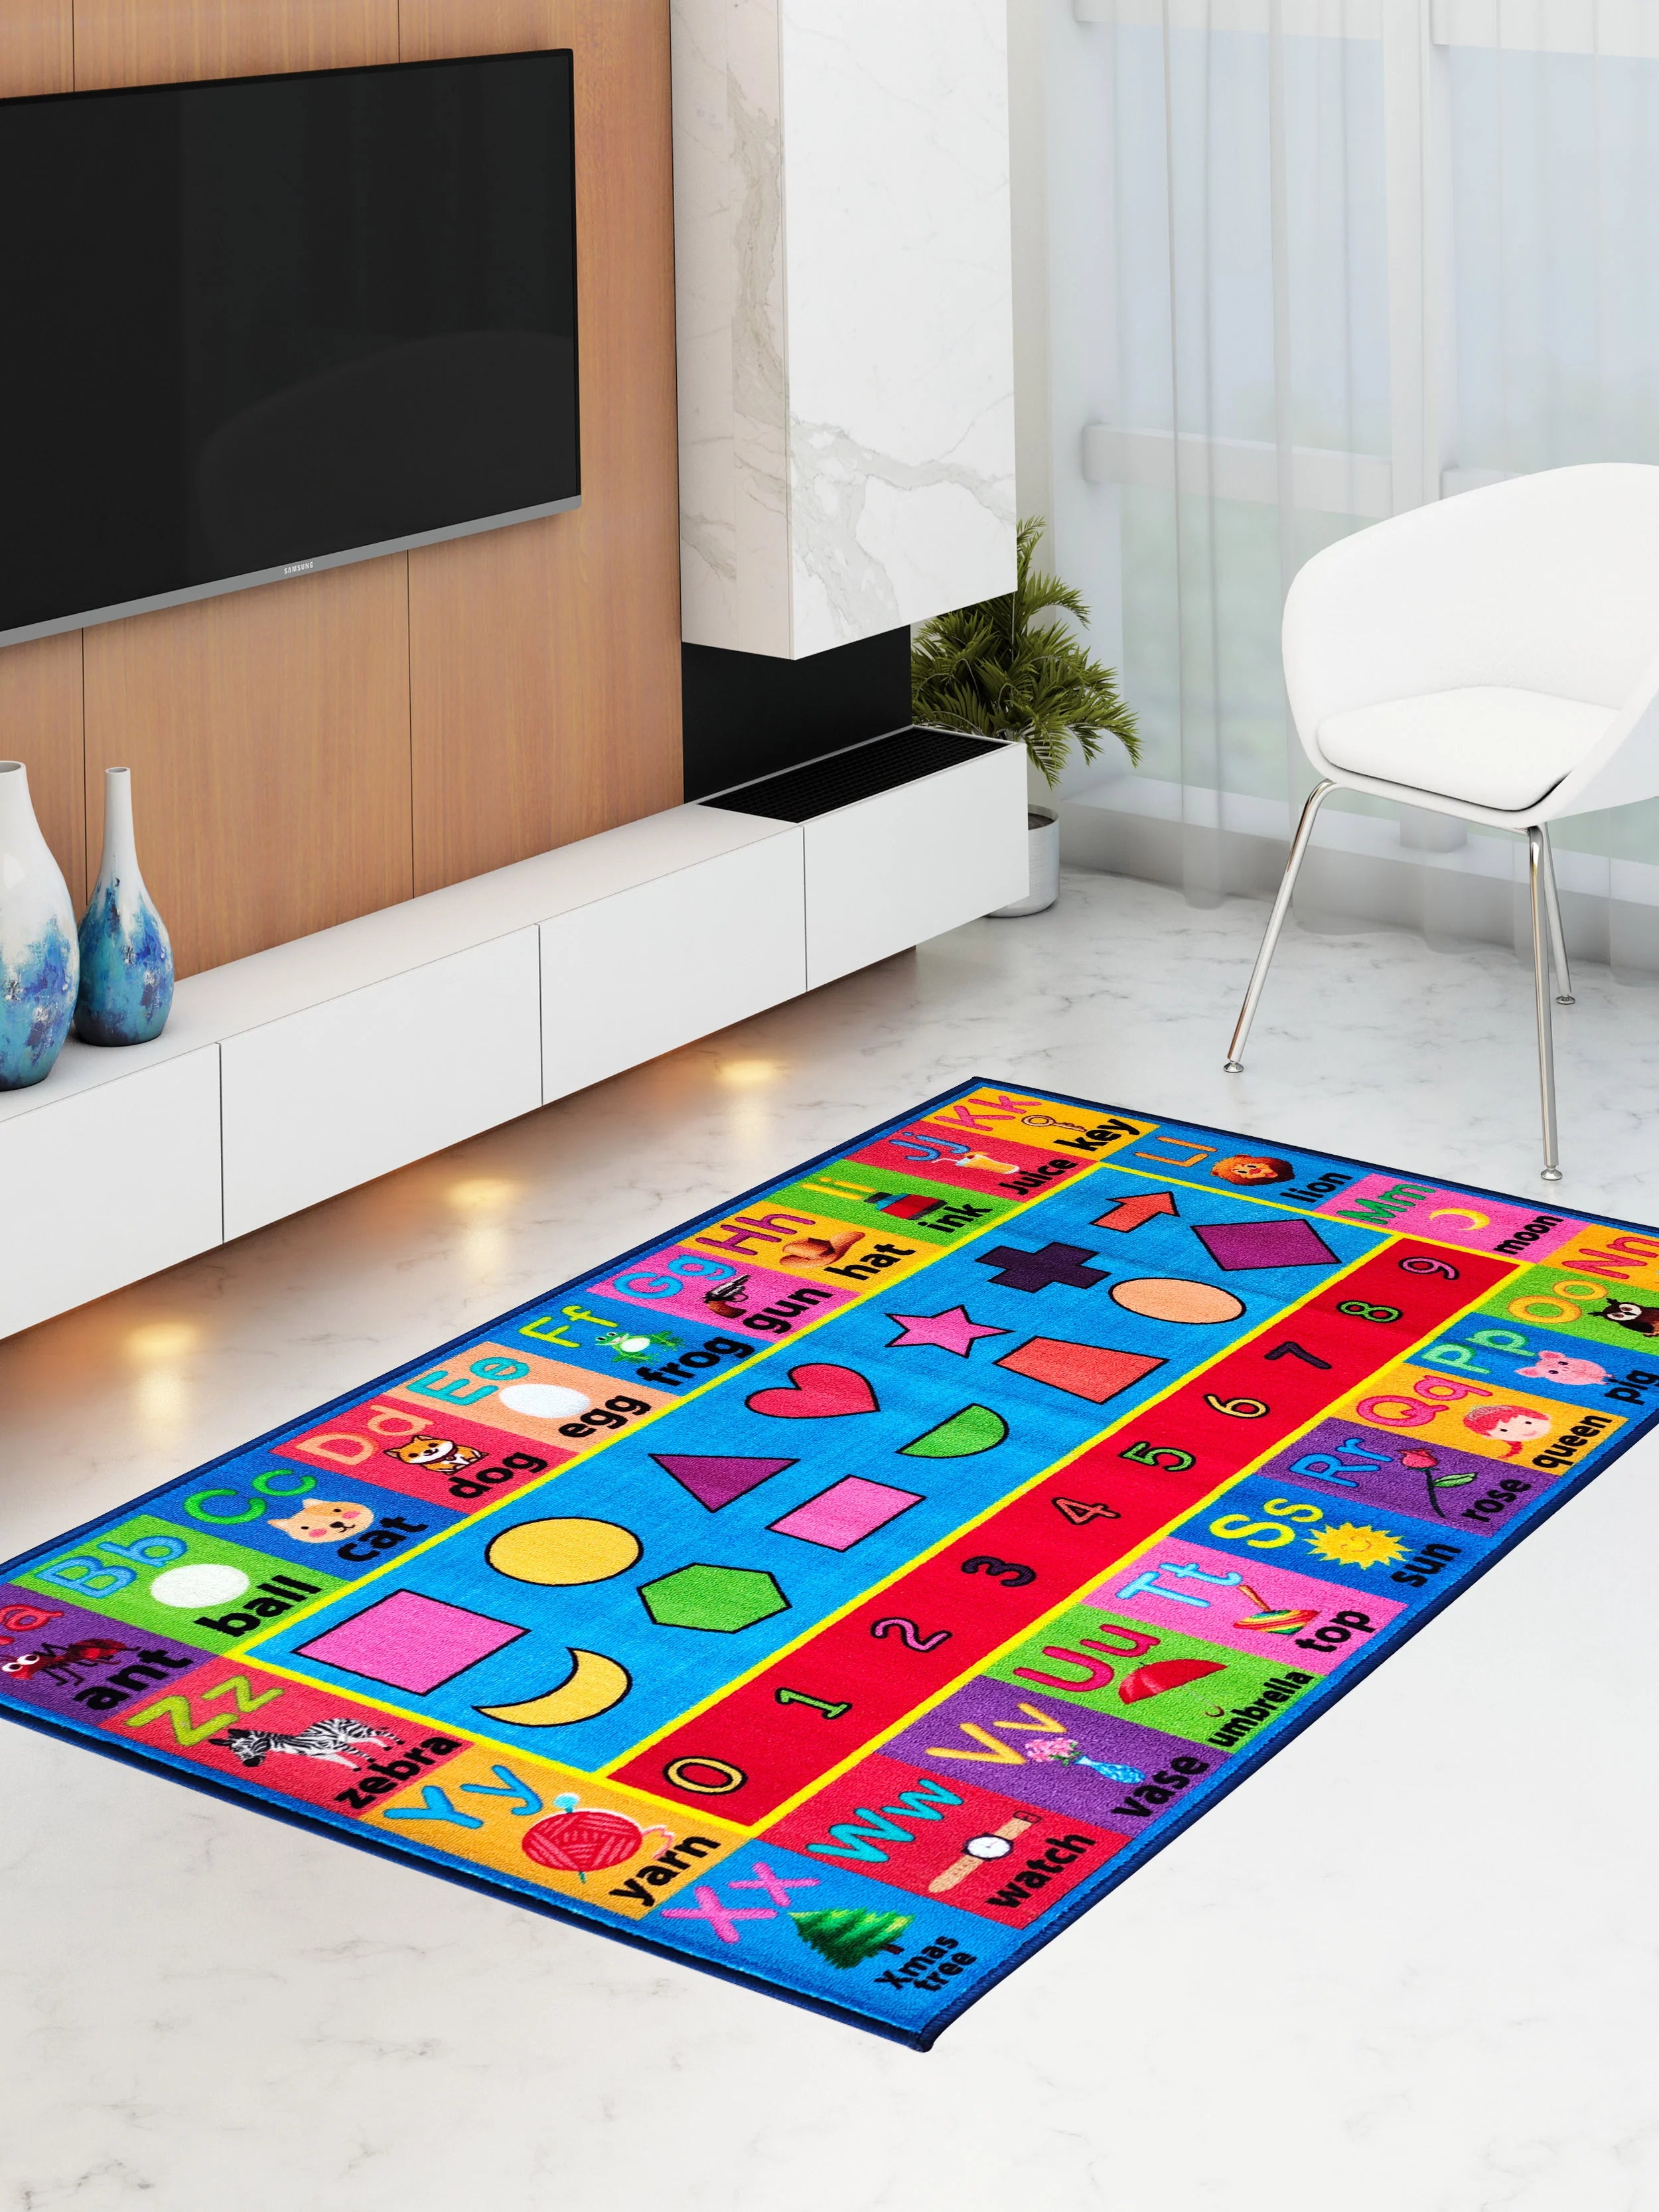 Immerse Your Child in Learning Adventures with Athom Living's Alphabetic Kids Carpet